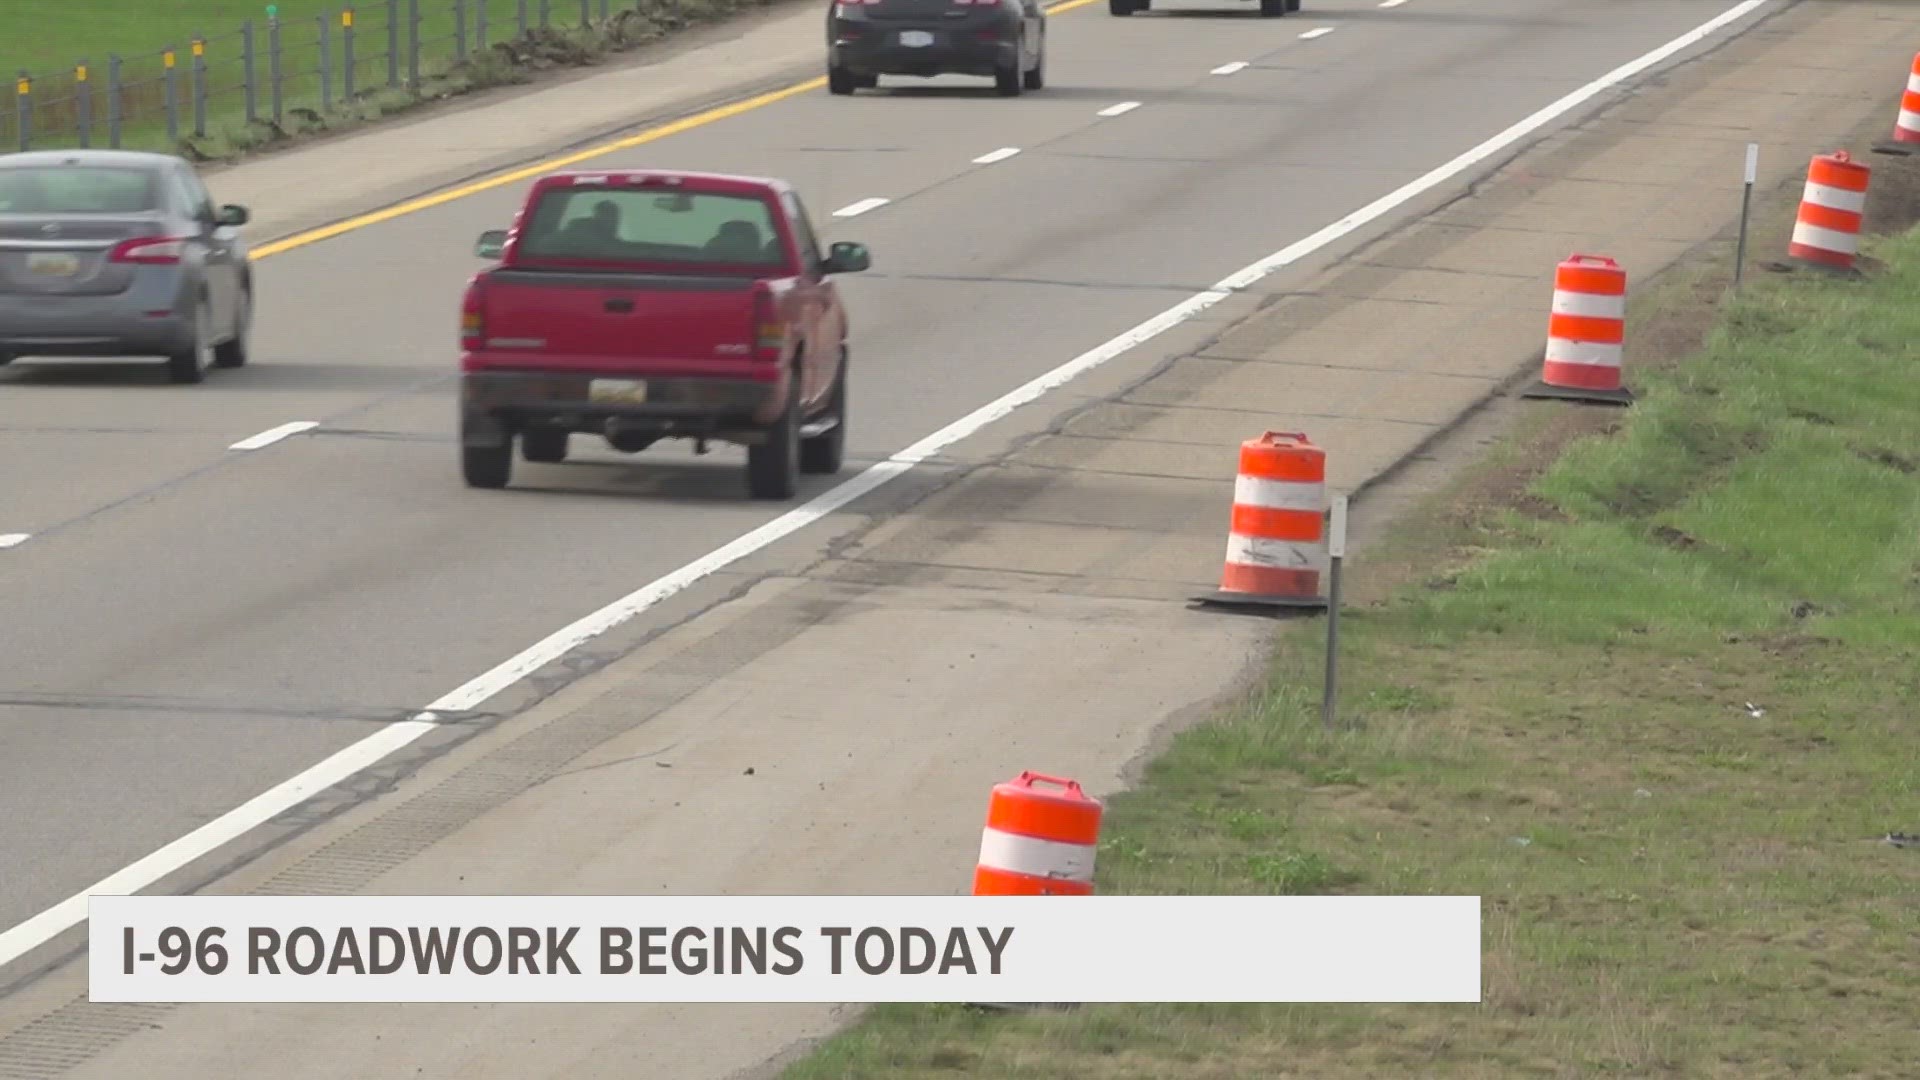 I-96 from Cascade Road through 28th Street will be impacted. The project is expected to be completed in November.